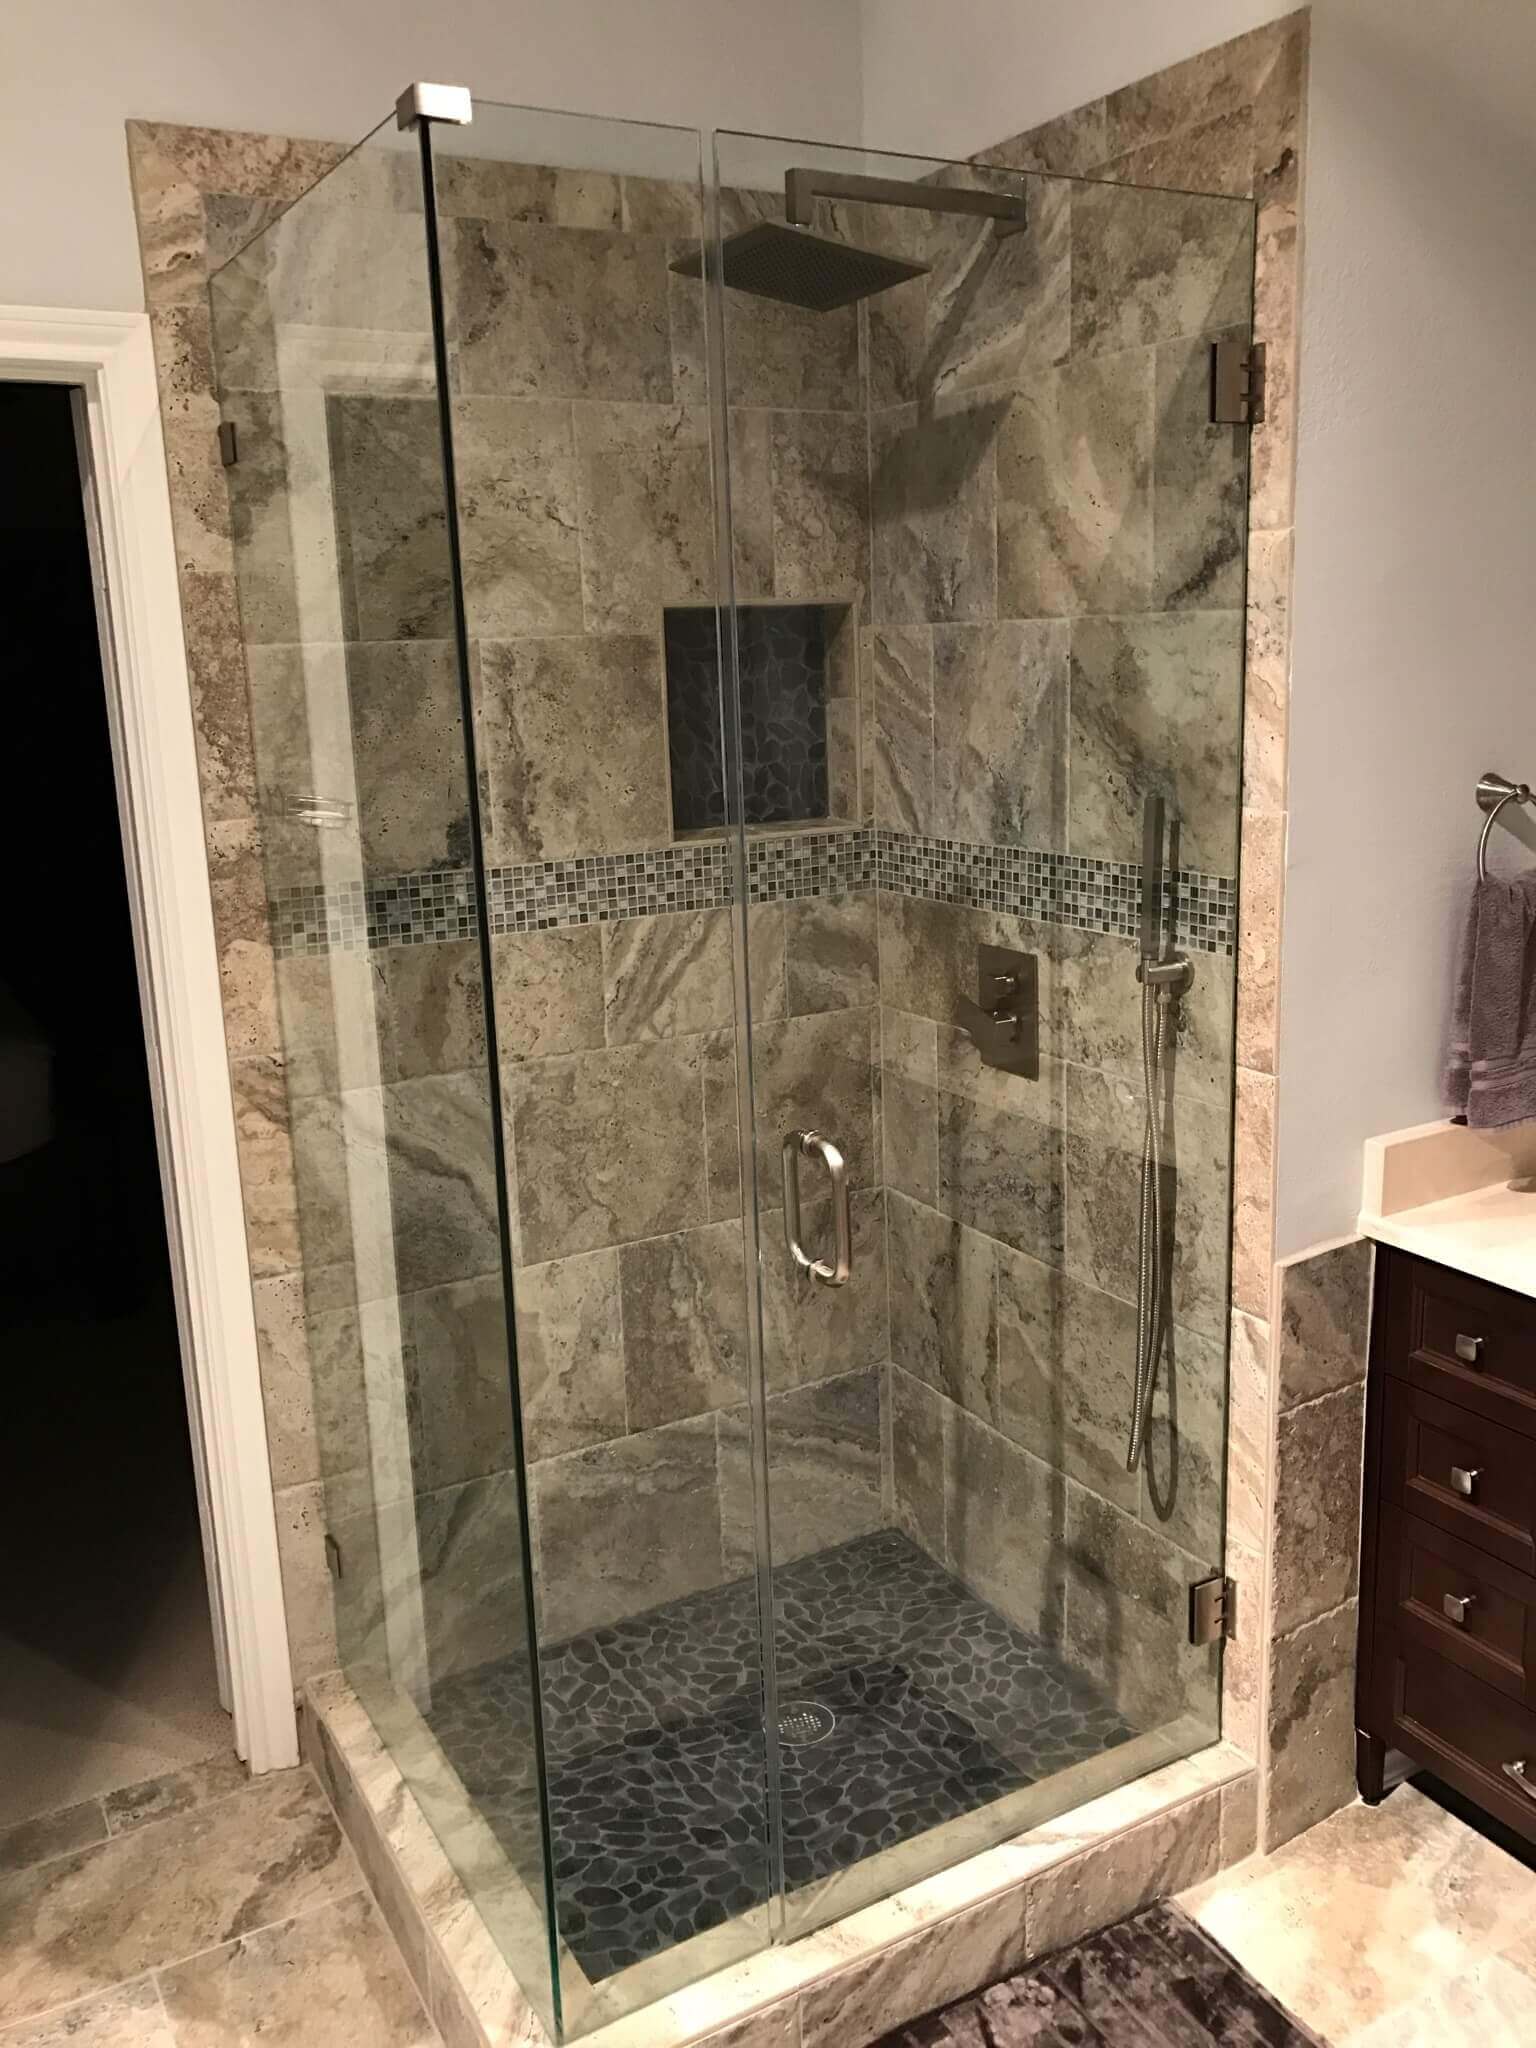 Best Tile For Shower Floor Walls, Can You Use Waterproof Flooring For Shower Walls